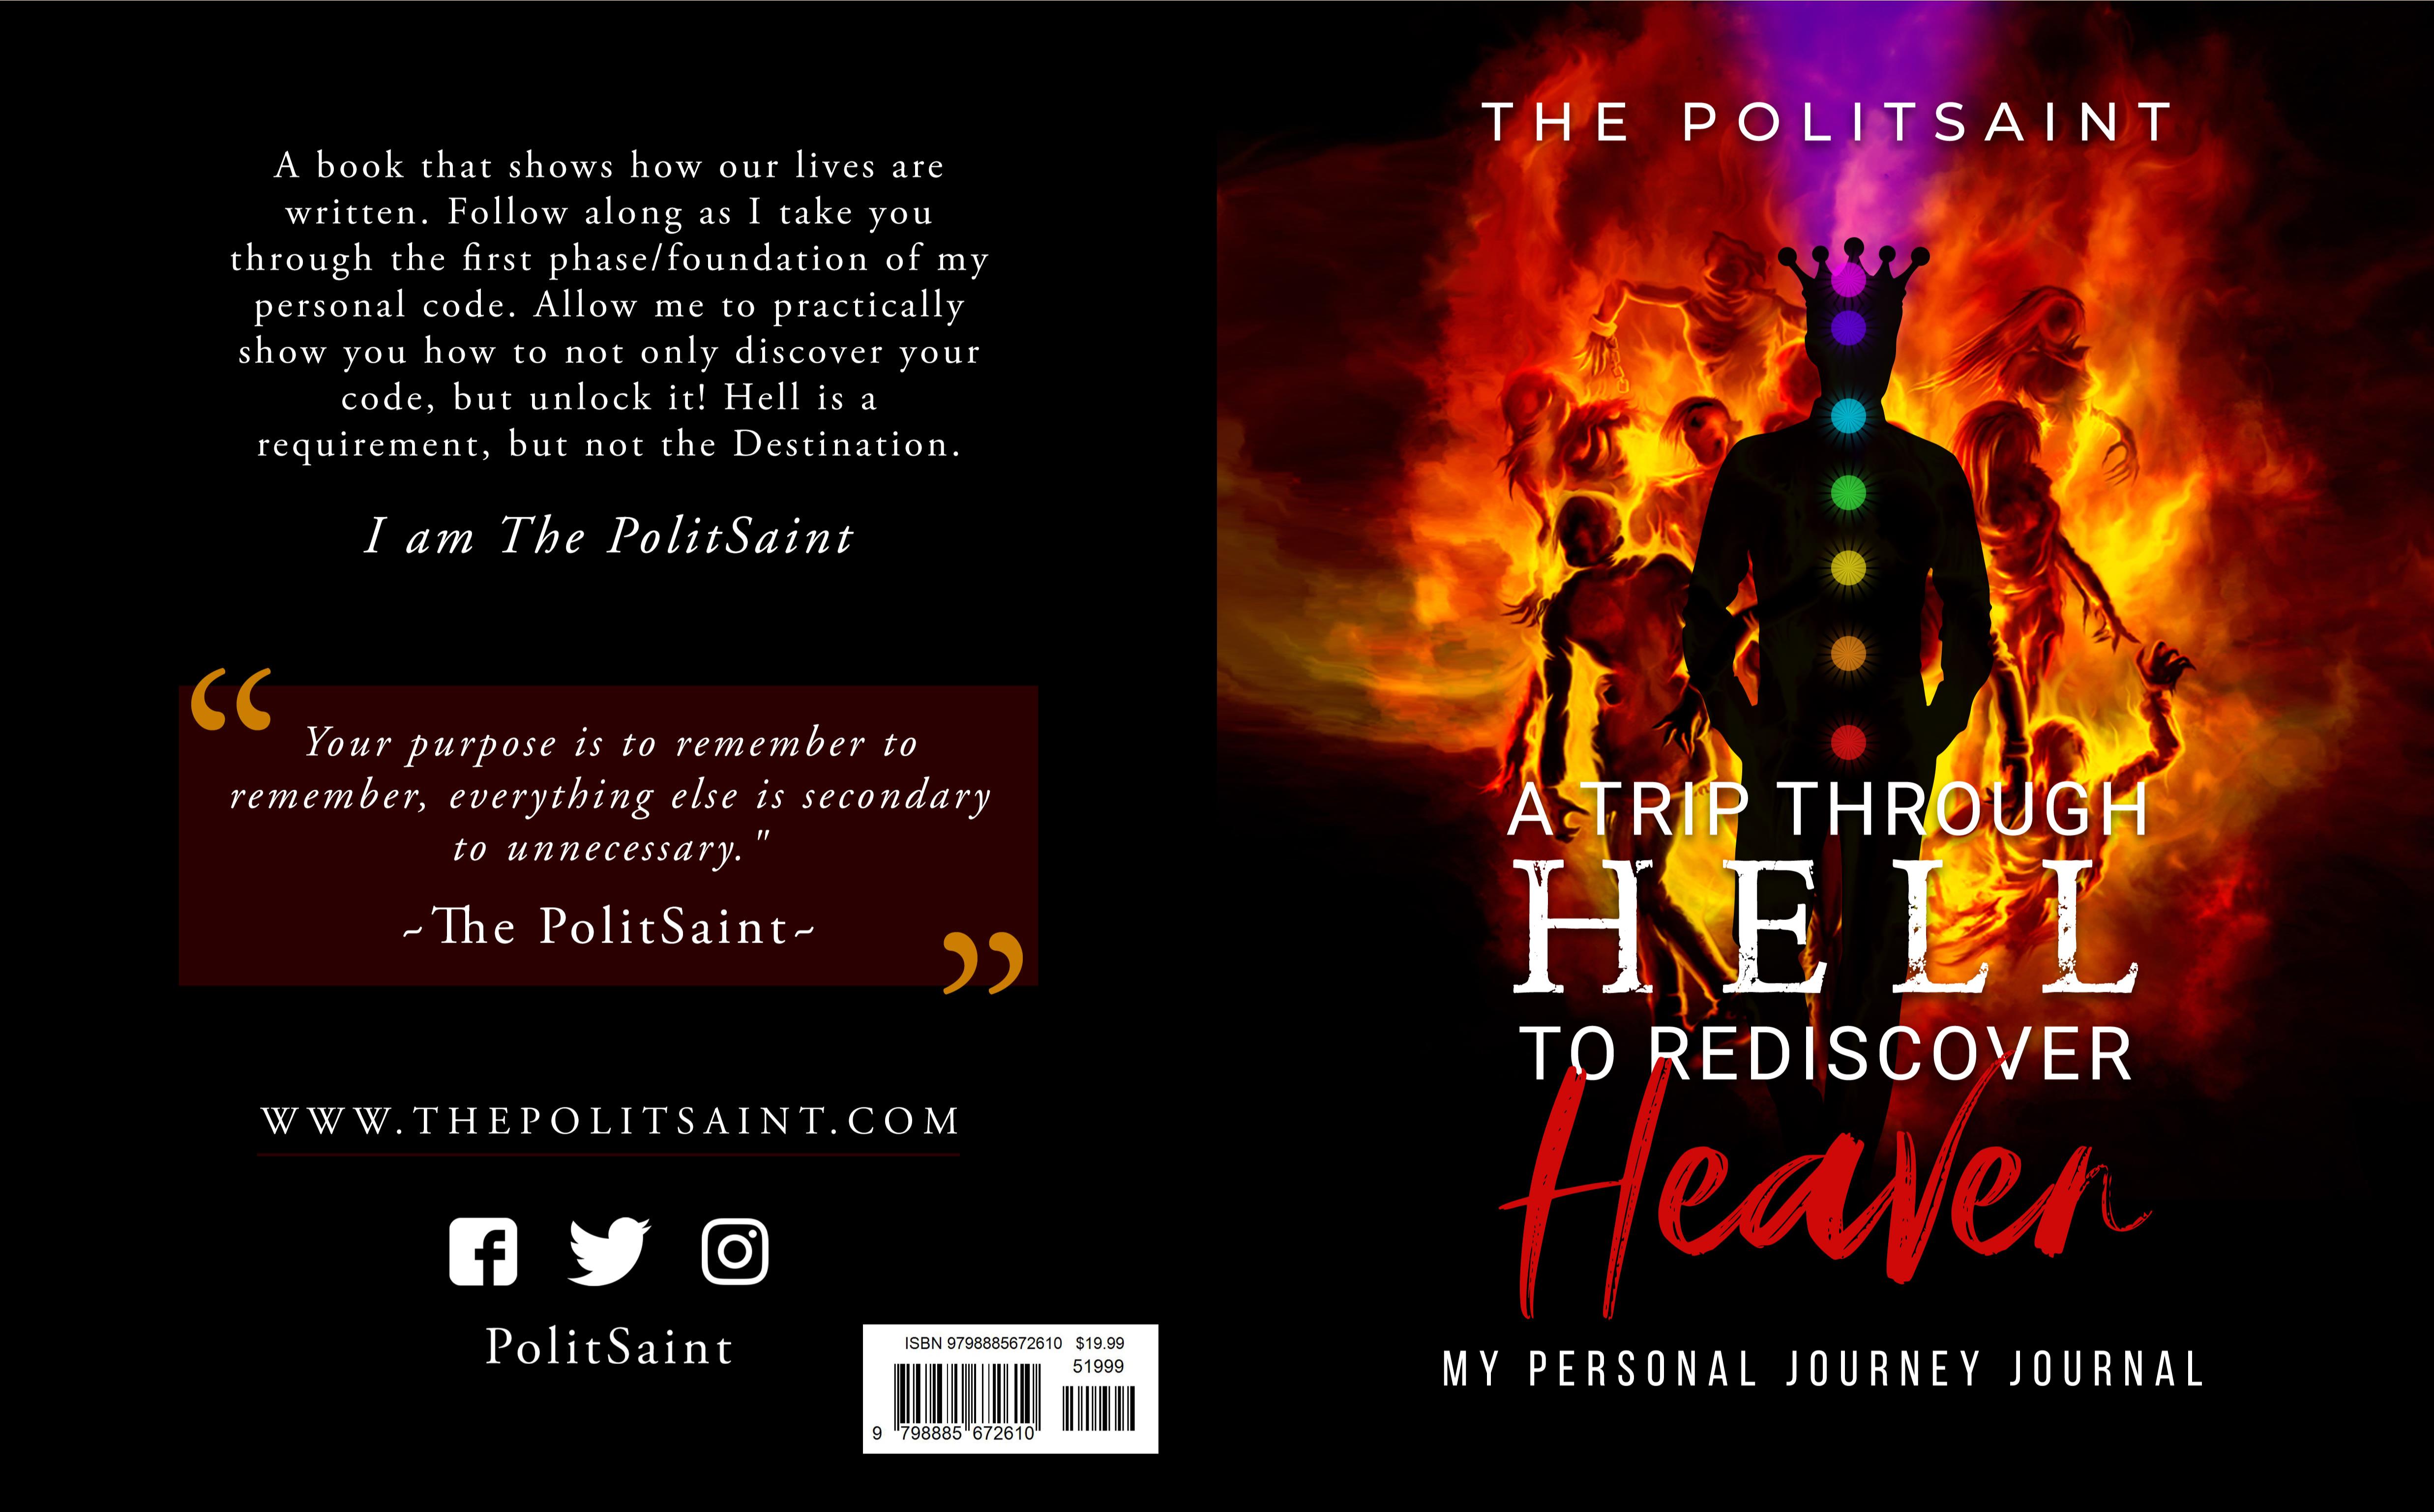 A Trip Through Hell To Rediscover Heaven Personal Journey Journal cover image